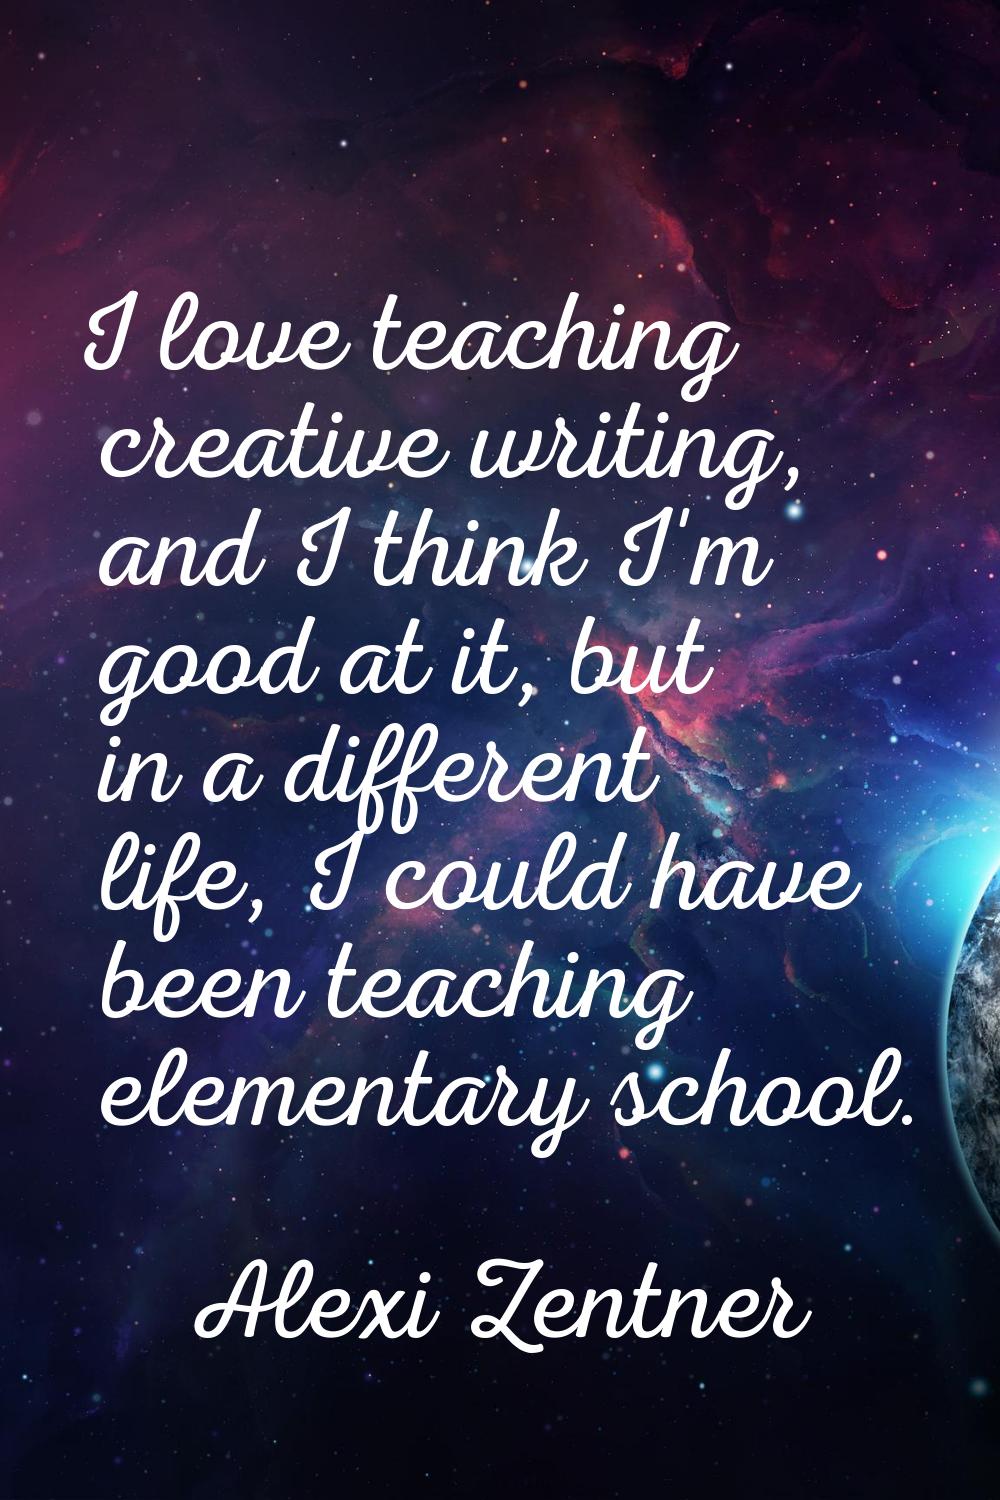 I love teaching creative writing, and I think I'm good at it, but in a different life, I could have